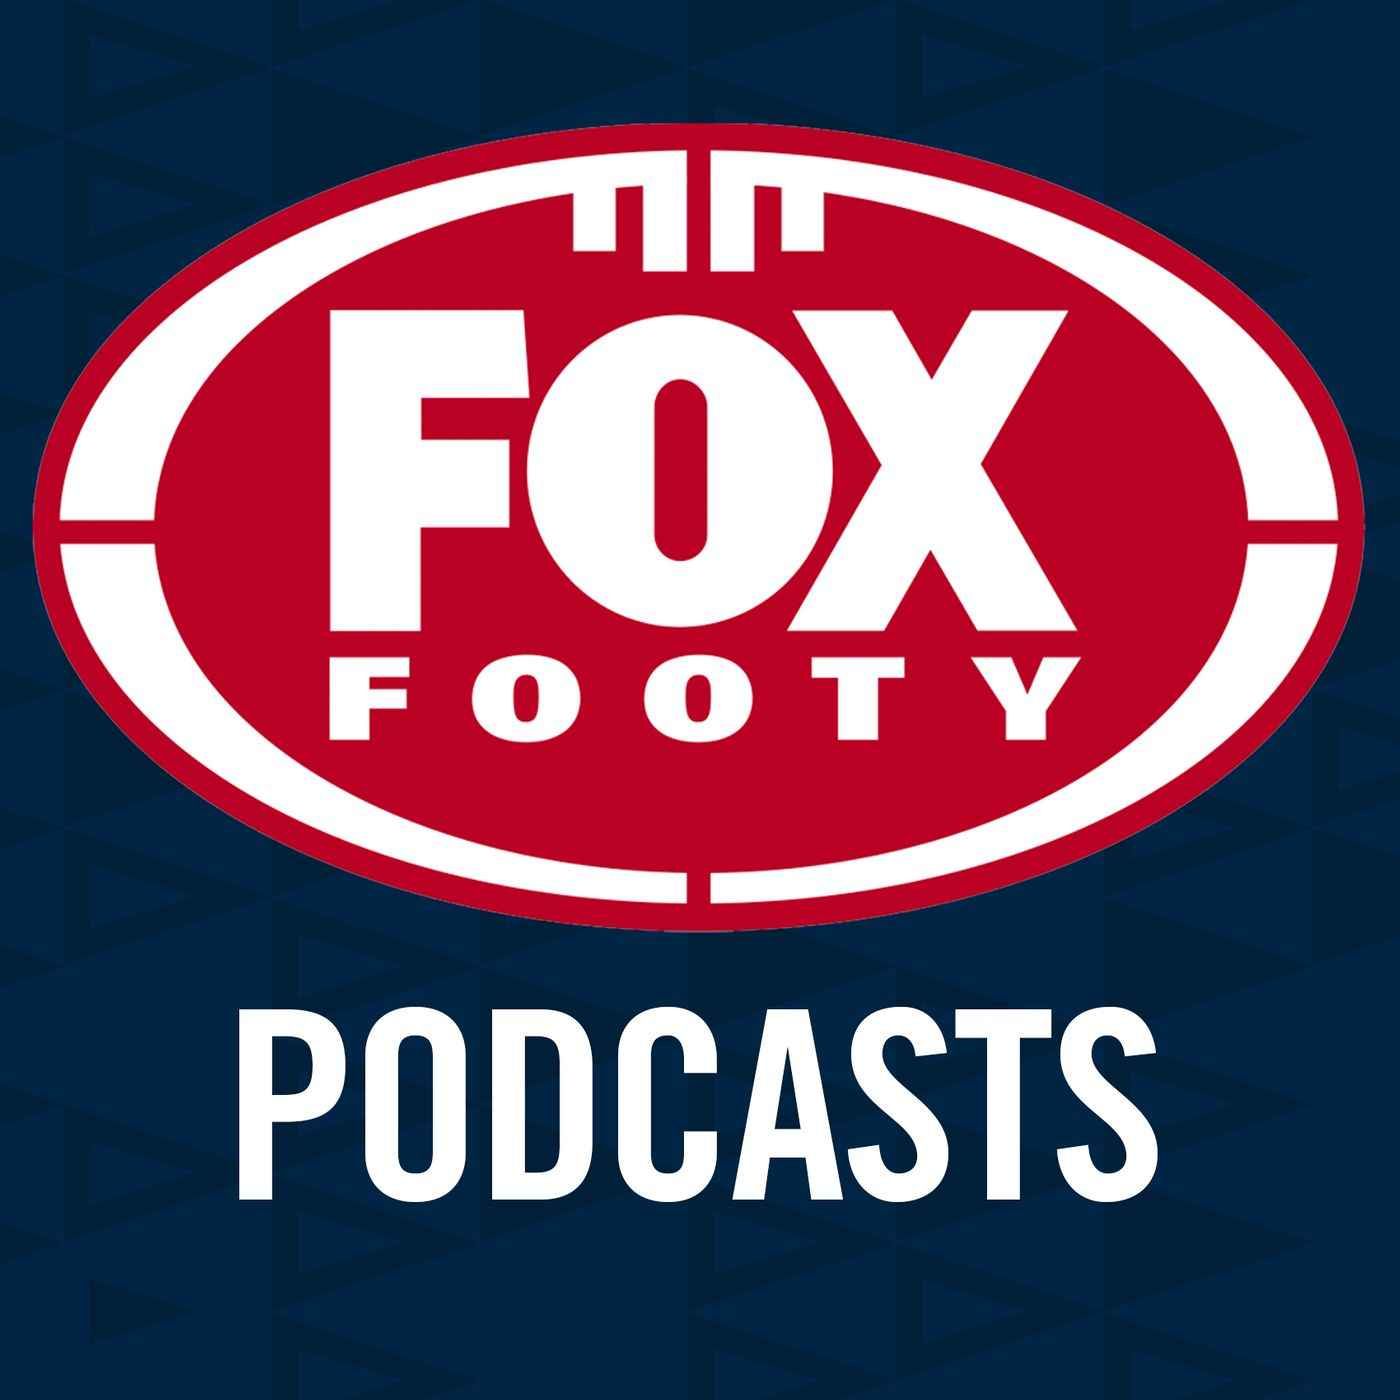 Fox Footy Podcast: Run home with 5 weeks left; is Simpson done at WC?